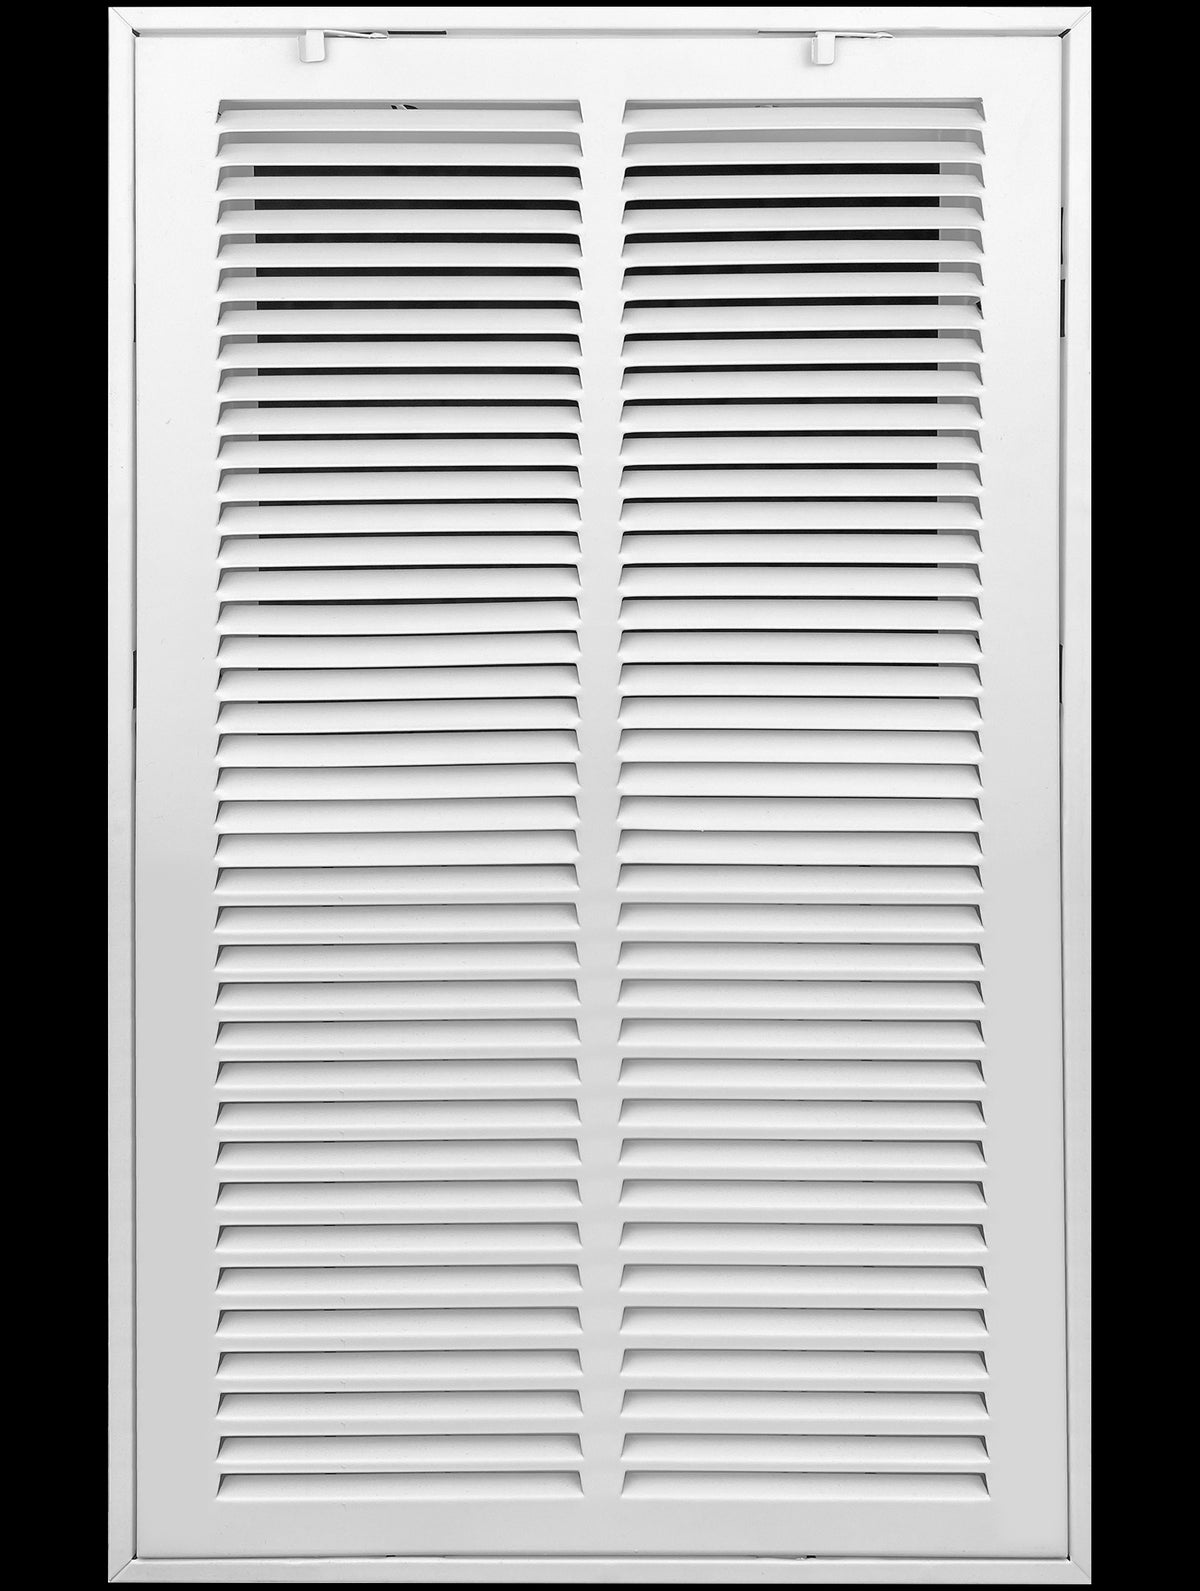 airgrilles 14" x 20" duct opening  -  hd steel return air filter grille for sidewall and ceiling (agc) 7agc-1raf-wh-14x20 756014649390 - 1